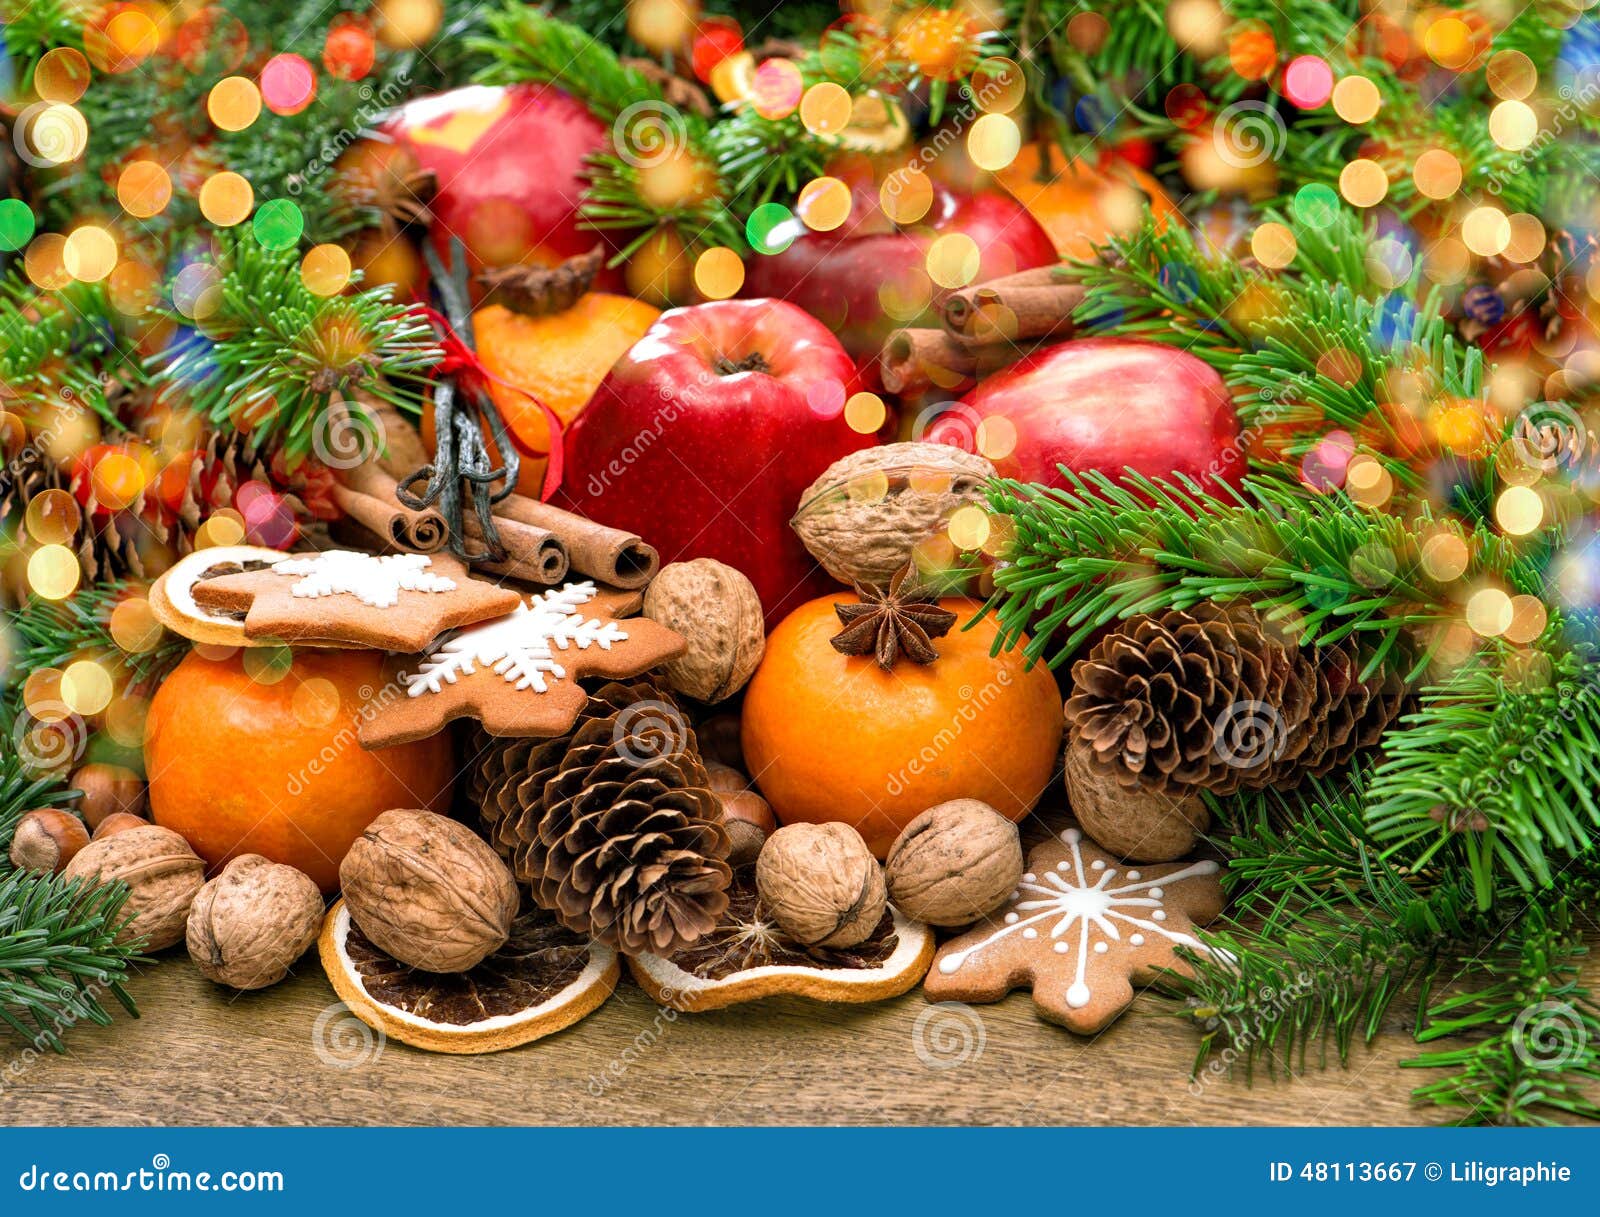 Fruits, Christmas Cookies and Spices with Wonderful Lights Stock Image ...